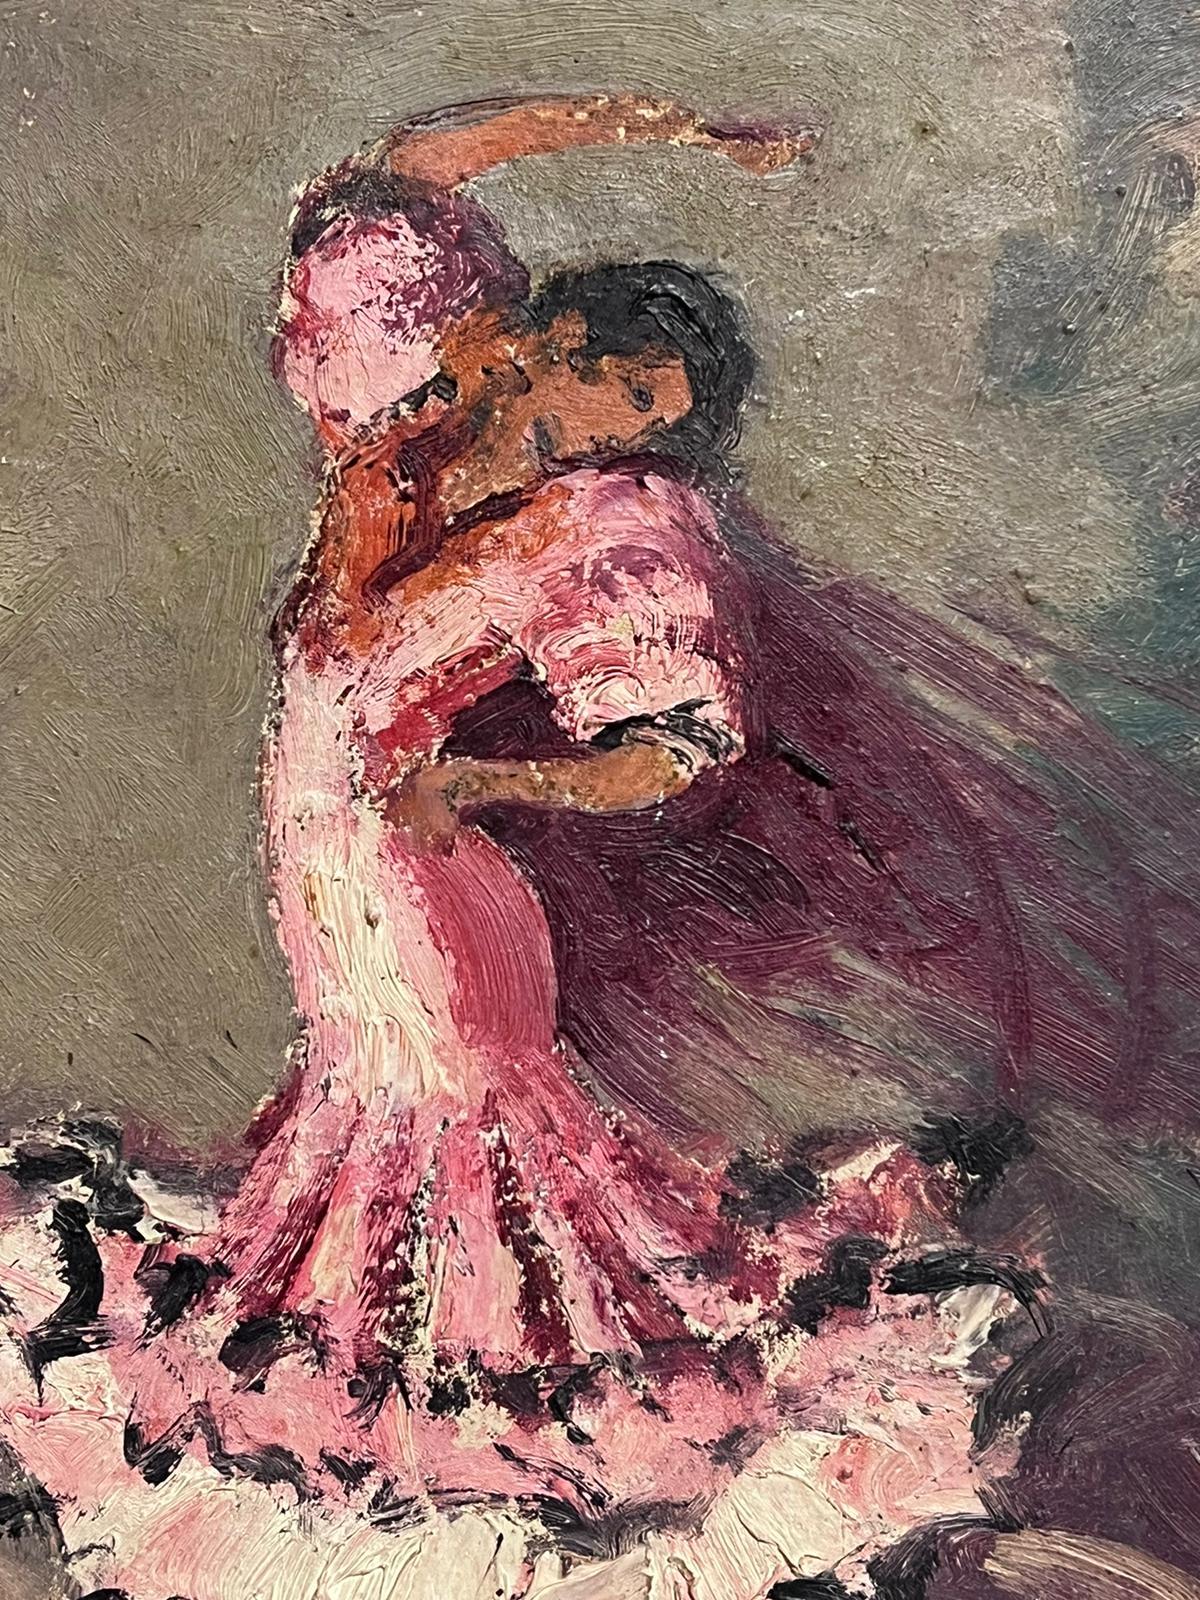 The Flamenco Dancer
by Georges Regnault (French 1898-1979)
signed oil on board, framed
framed: 16 x 13 inches
board: 11 x 9 inches
provenance: private collection, France
condition: good and sound condition